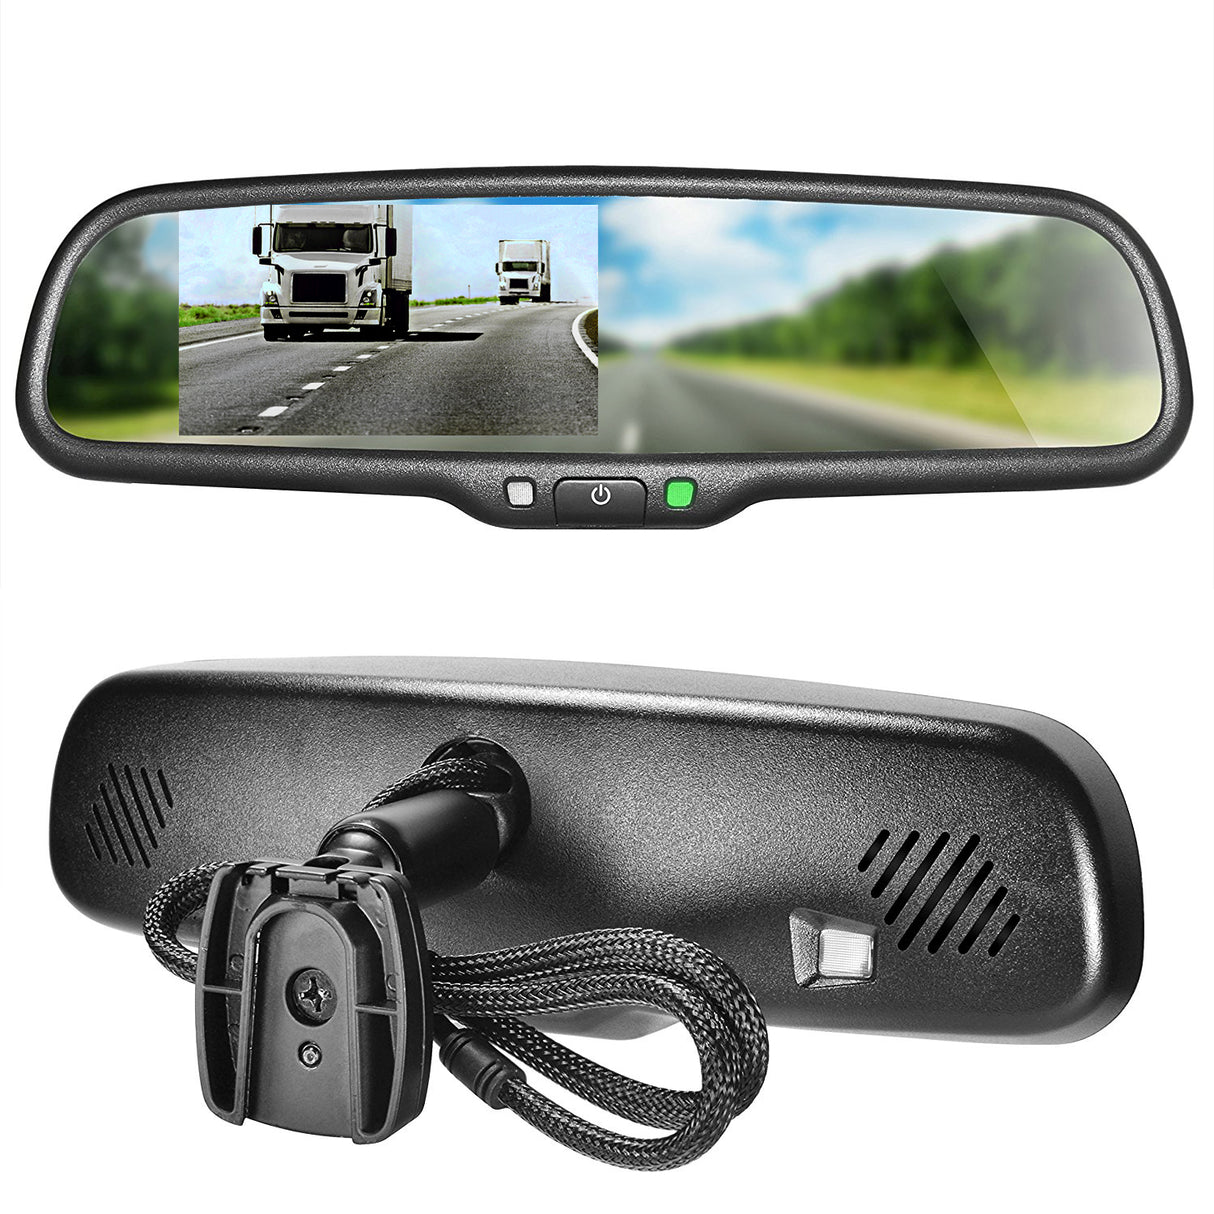 Master Tailgaters 10.5" OEM Rear View Mirror with 4.3" LCD Screen | Rearview Universal Fit Mount | Auto Adjusting Brightness LCD | Anti Glare | Full Original Mirror Replacement | Easy to Install